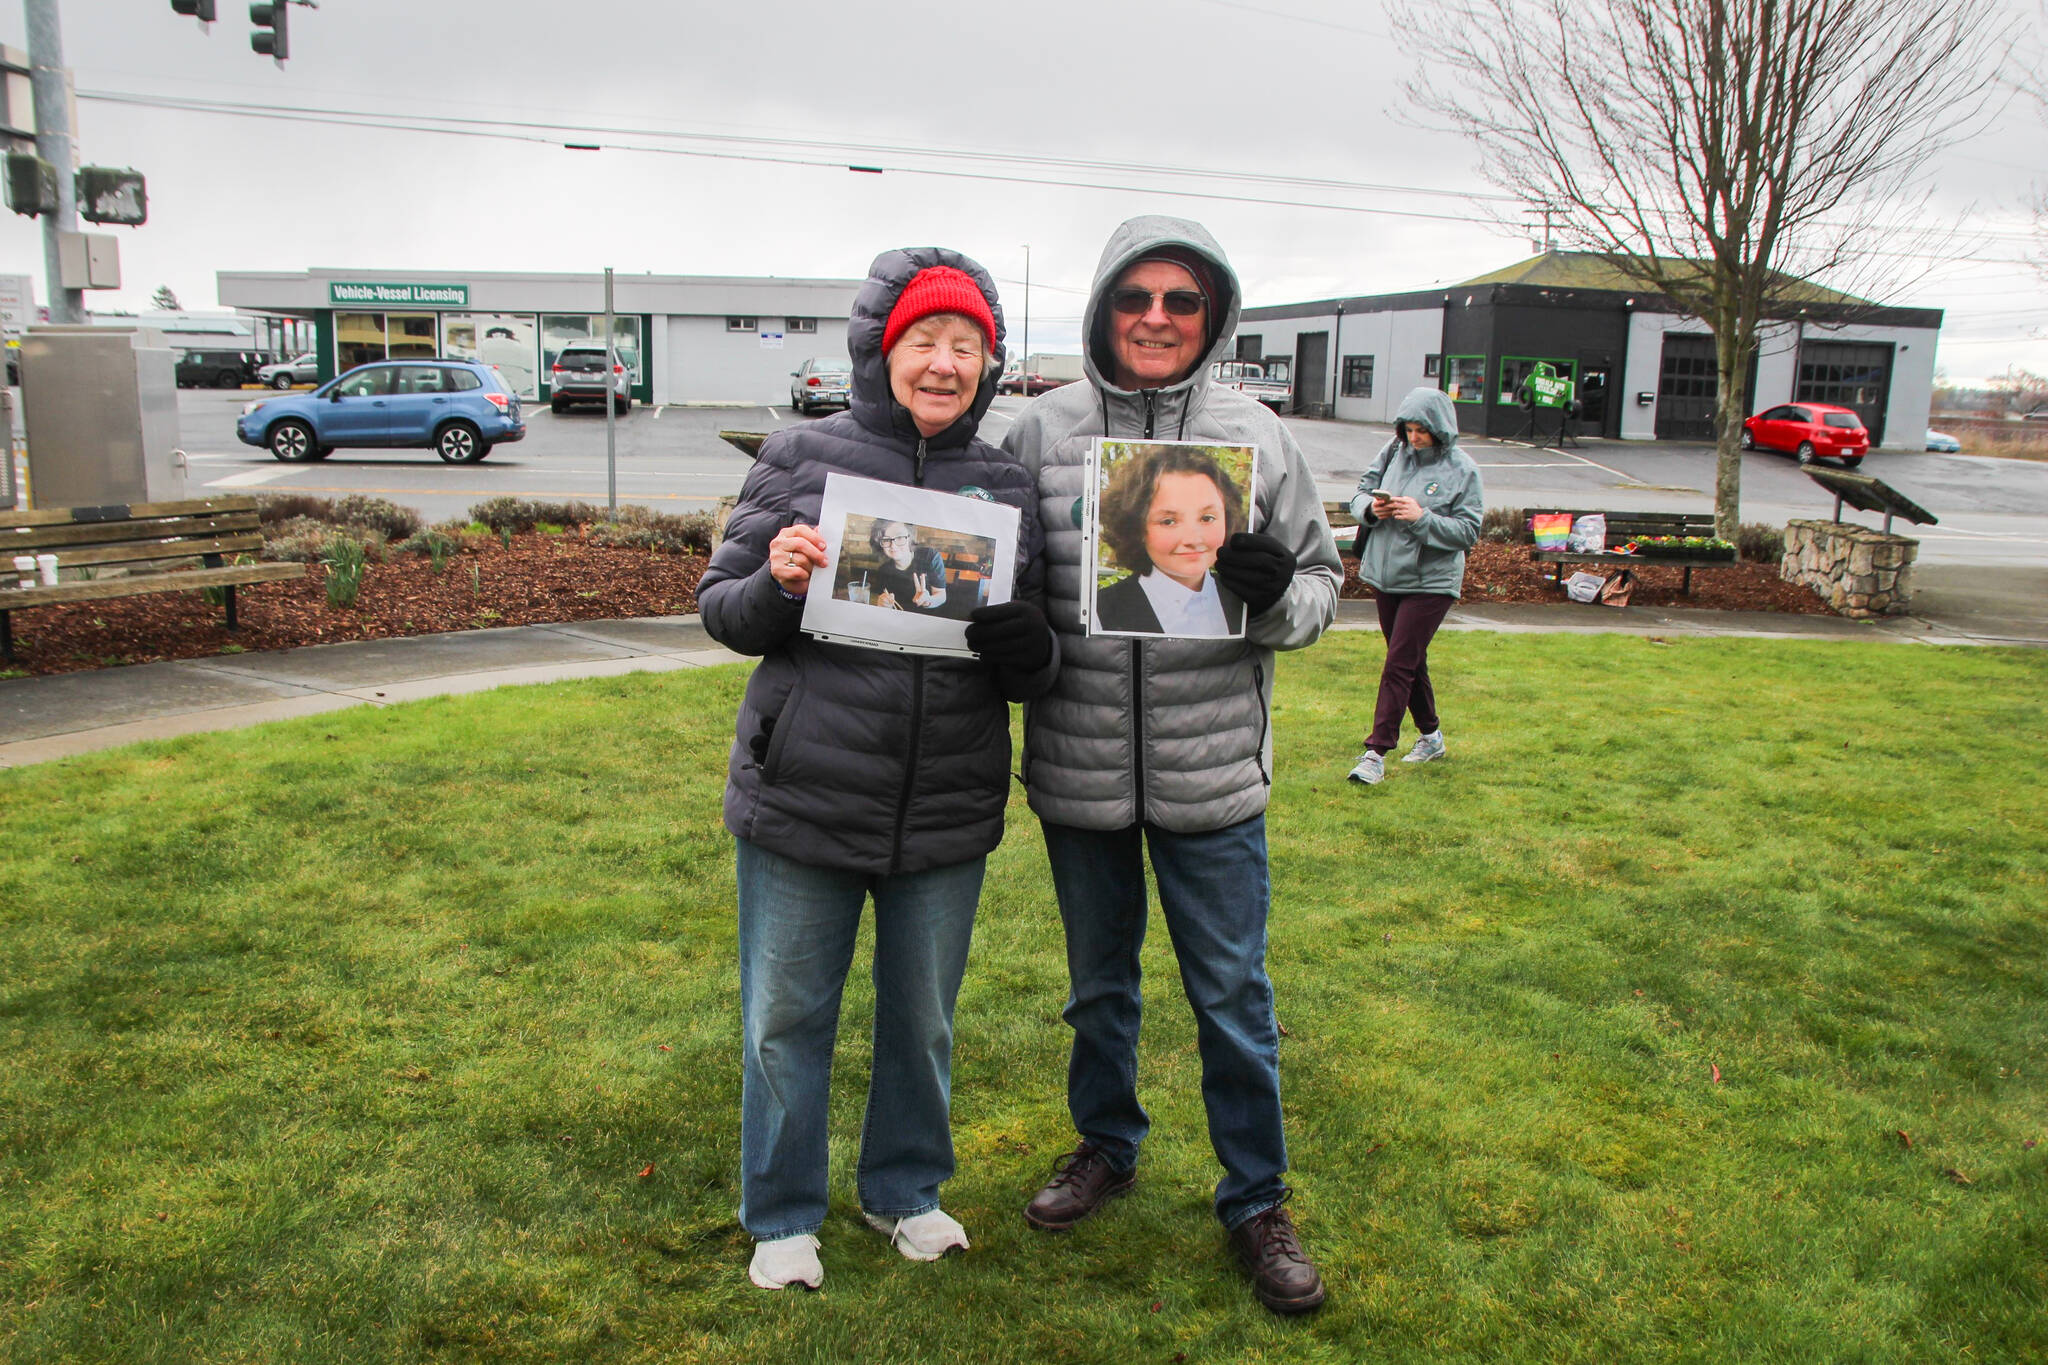 Tom and Michelle Johnson, members of the St. Stephen’s Episcopal Church, joined the rally to show support for trans people in Oak Harbor. (Photo by Luisa Loi)